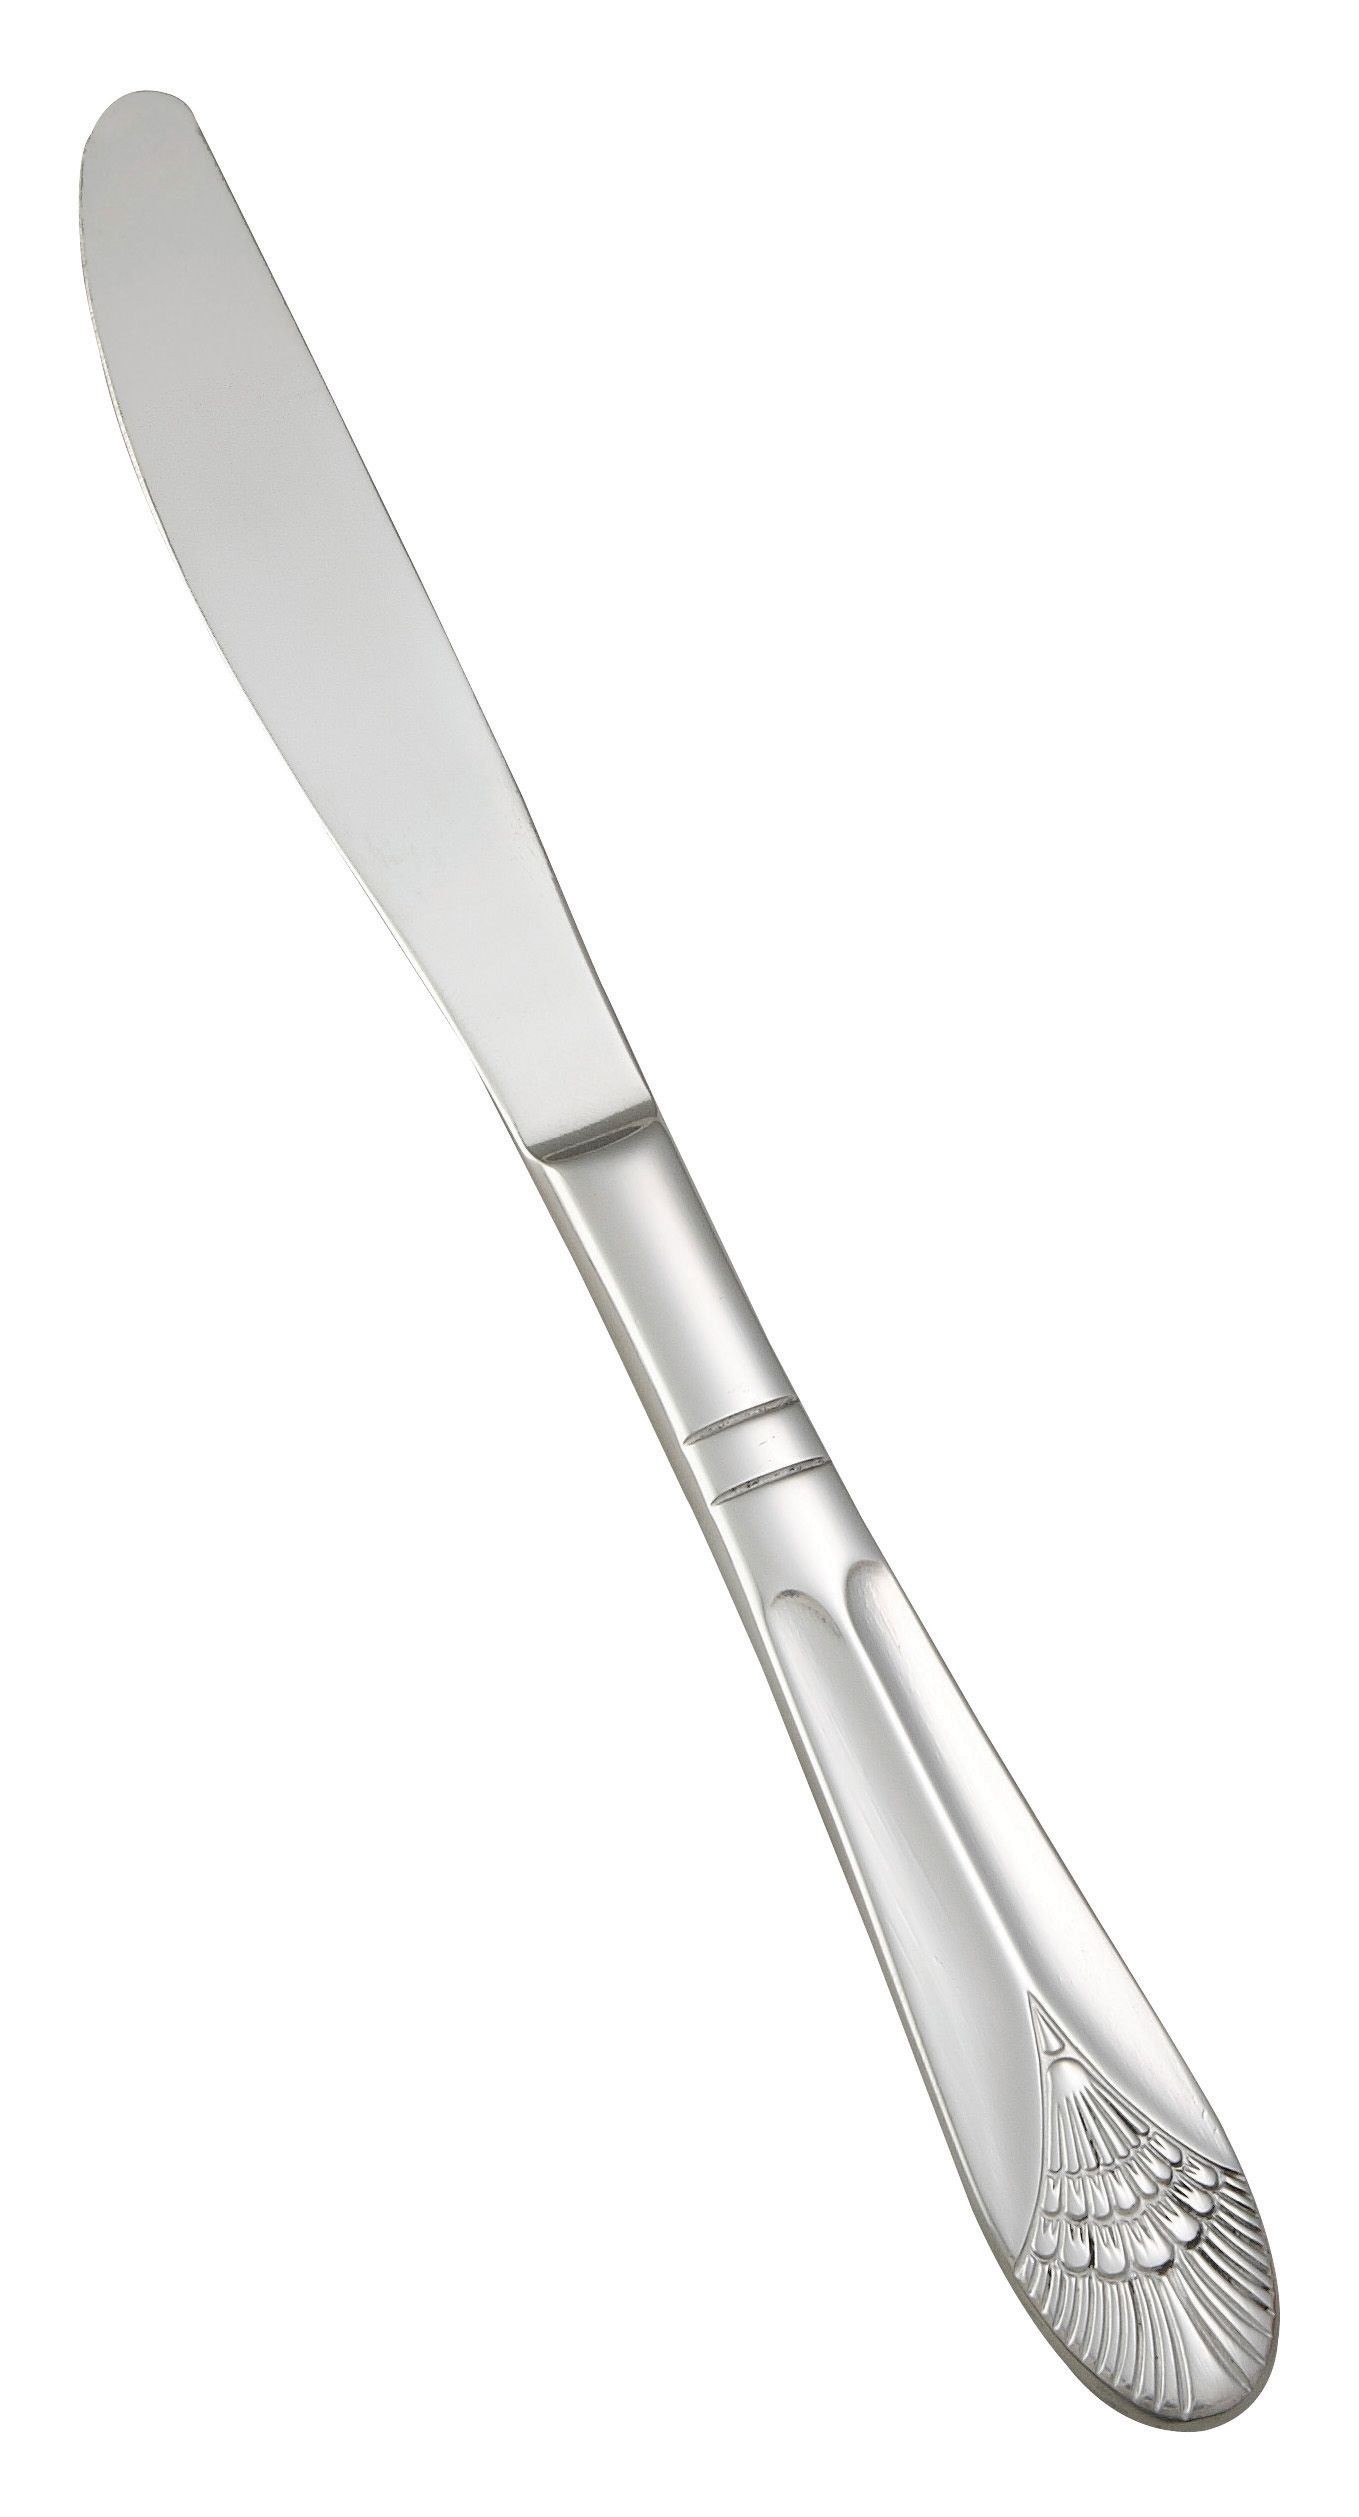 Winco 0031-18 Peacock Extra Heavy Stainless Steel European Table Knife (12/Pack)